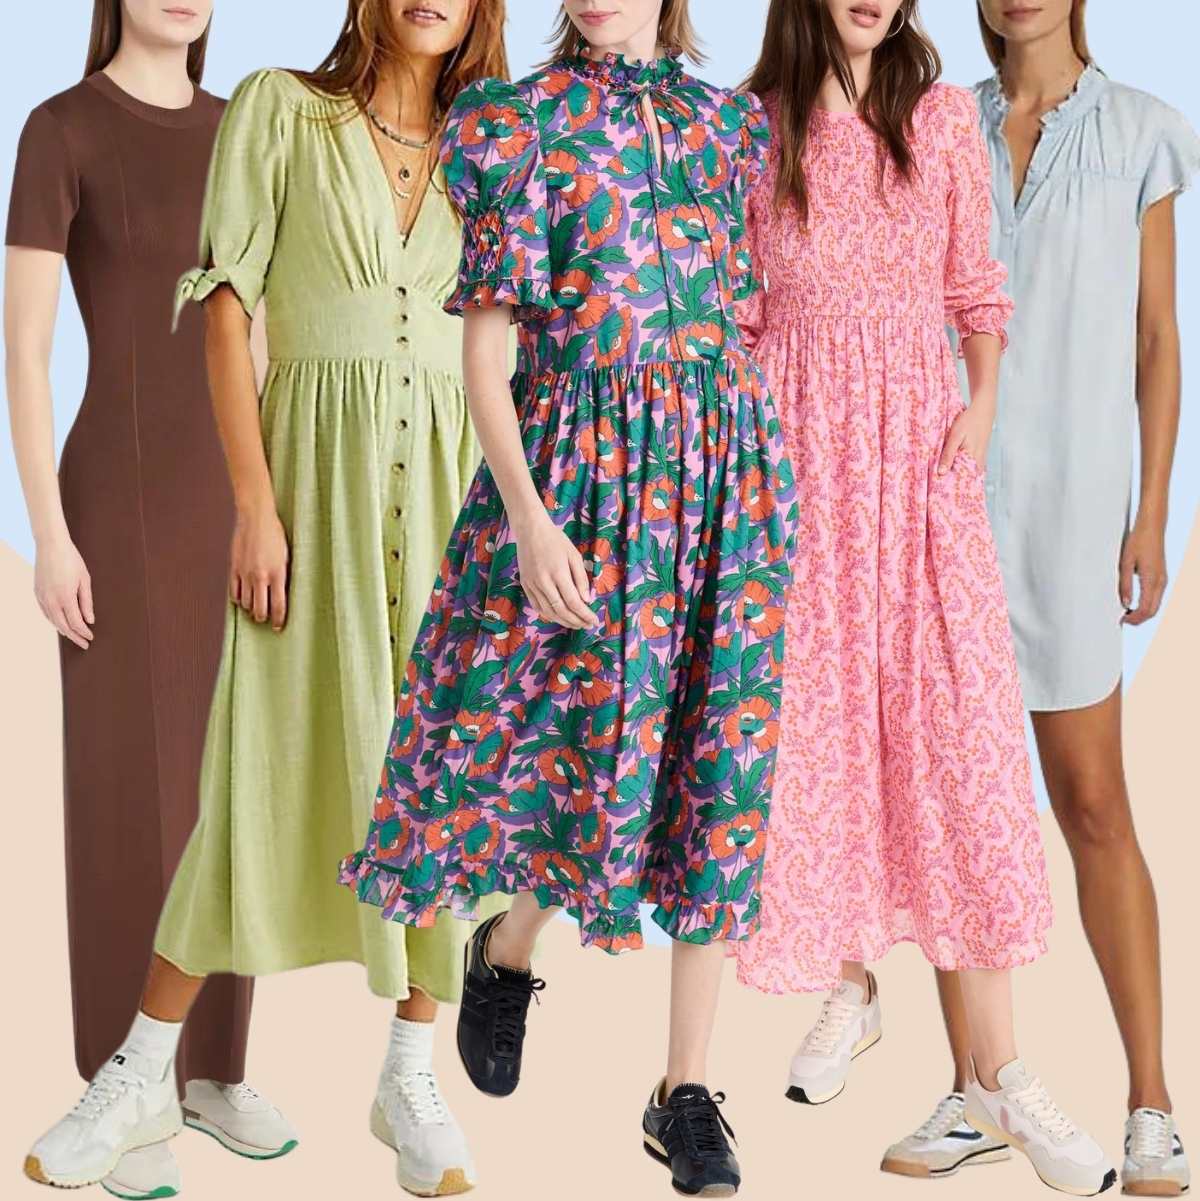 Collage of 5 women wearing retro sneakers with dresses.